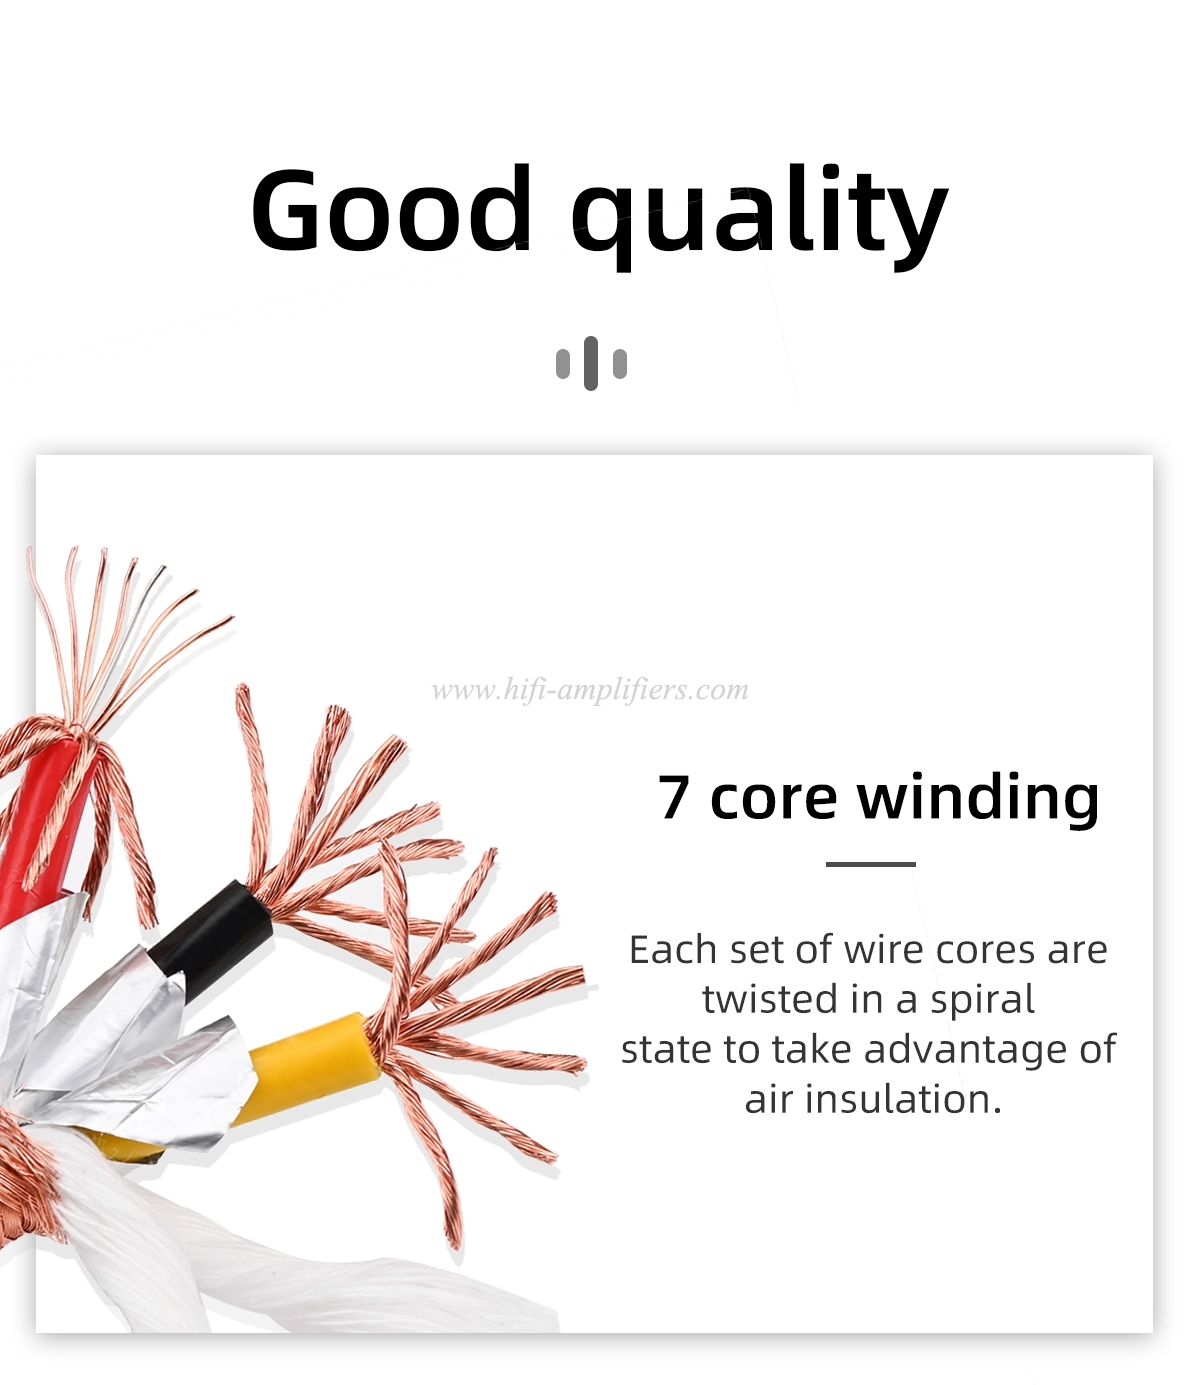 Hifi Power Cable High Quality OCC Copper EU US AU Power Cord For CD Decoder and Tube Amplifier